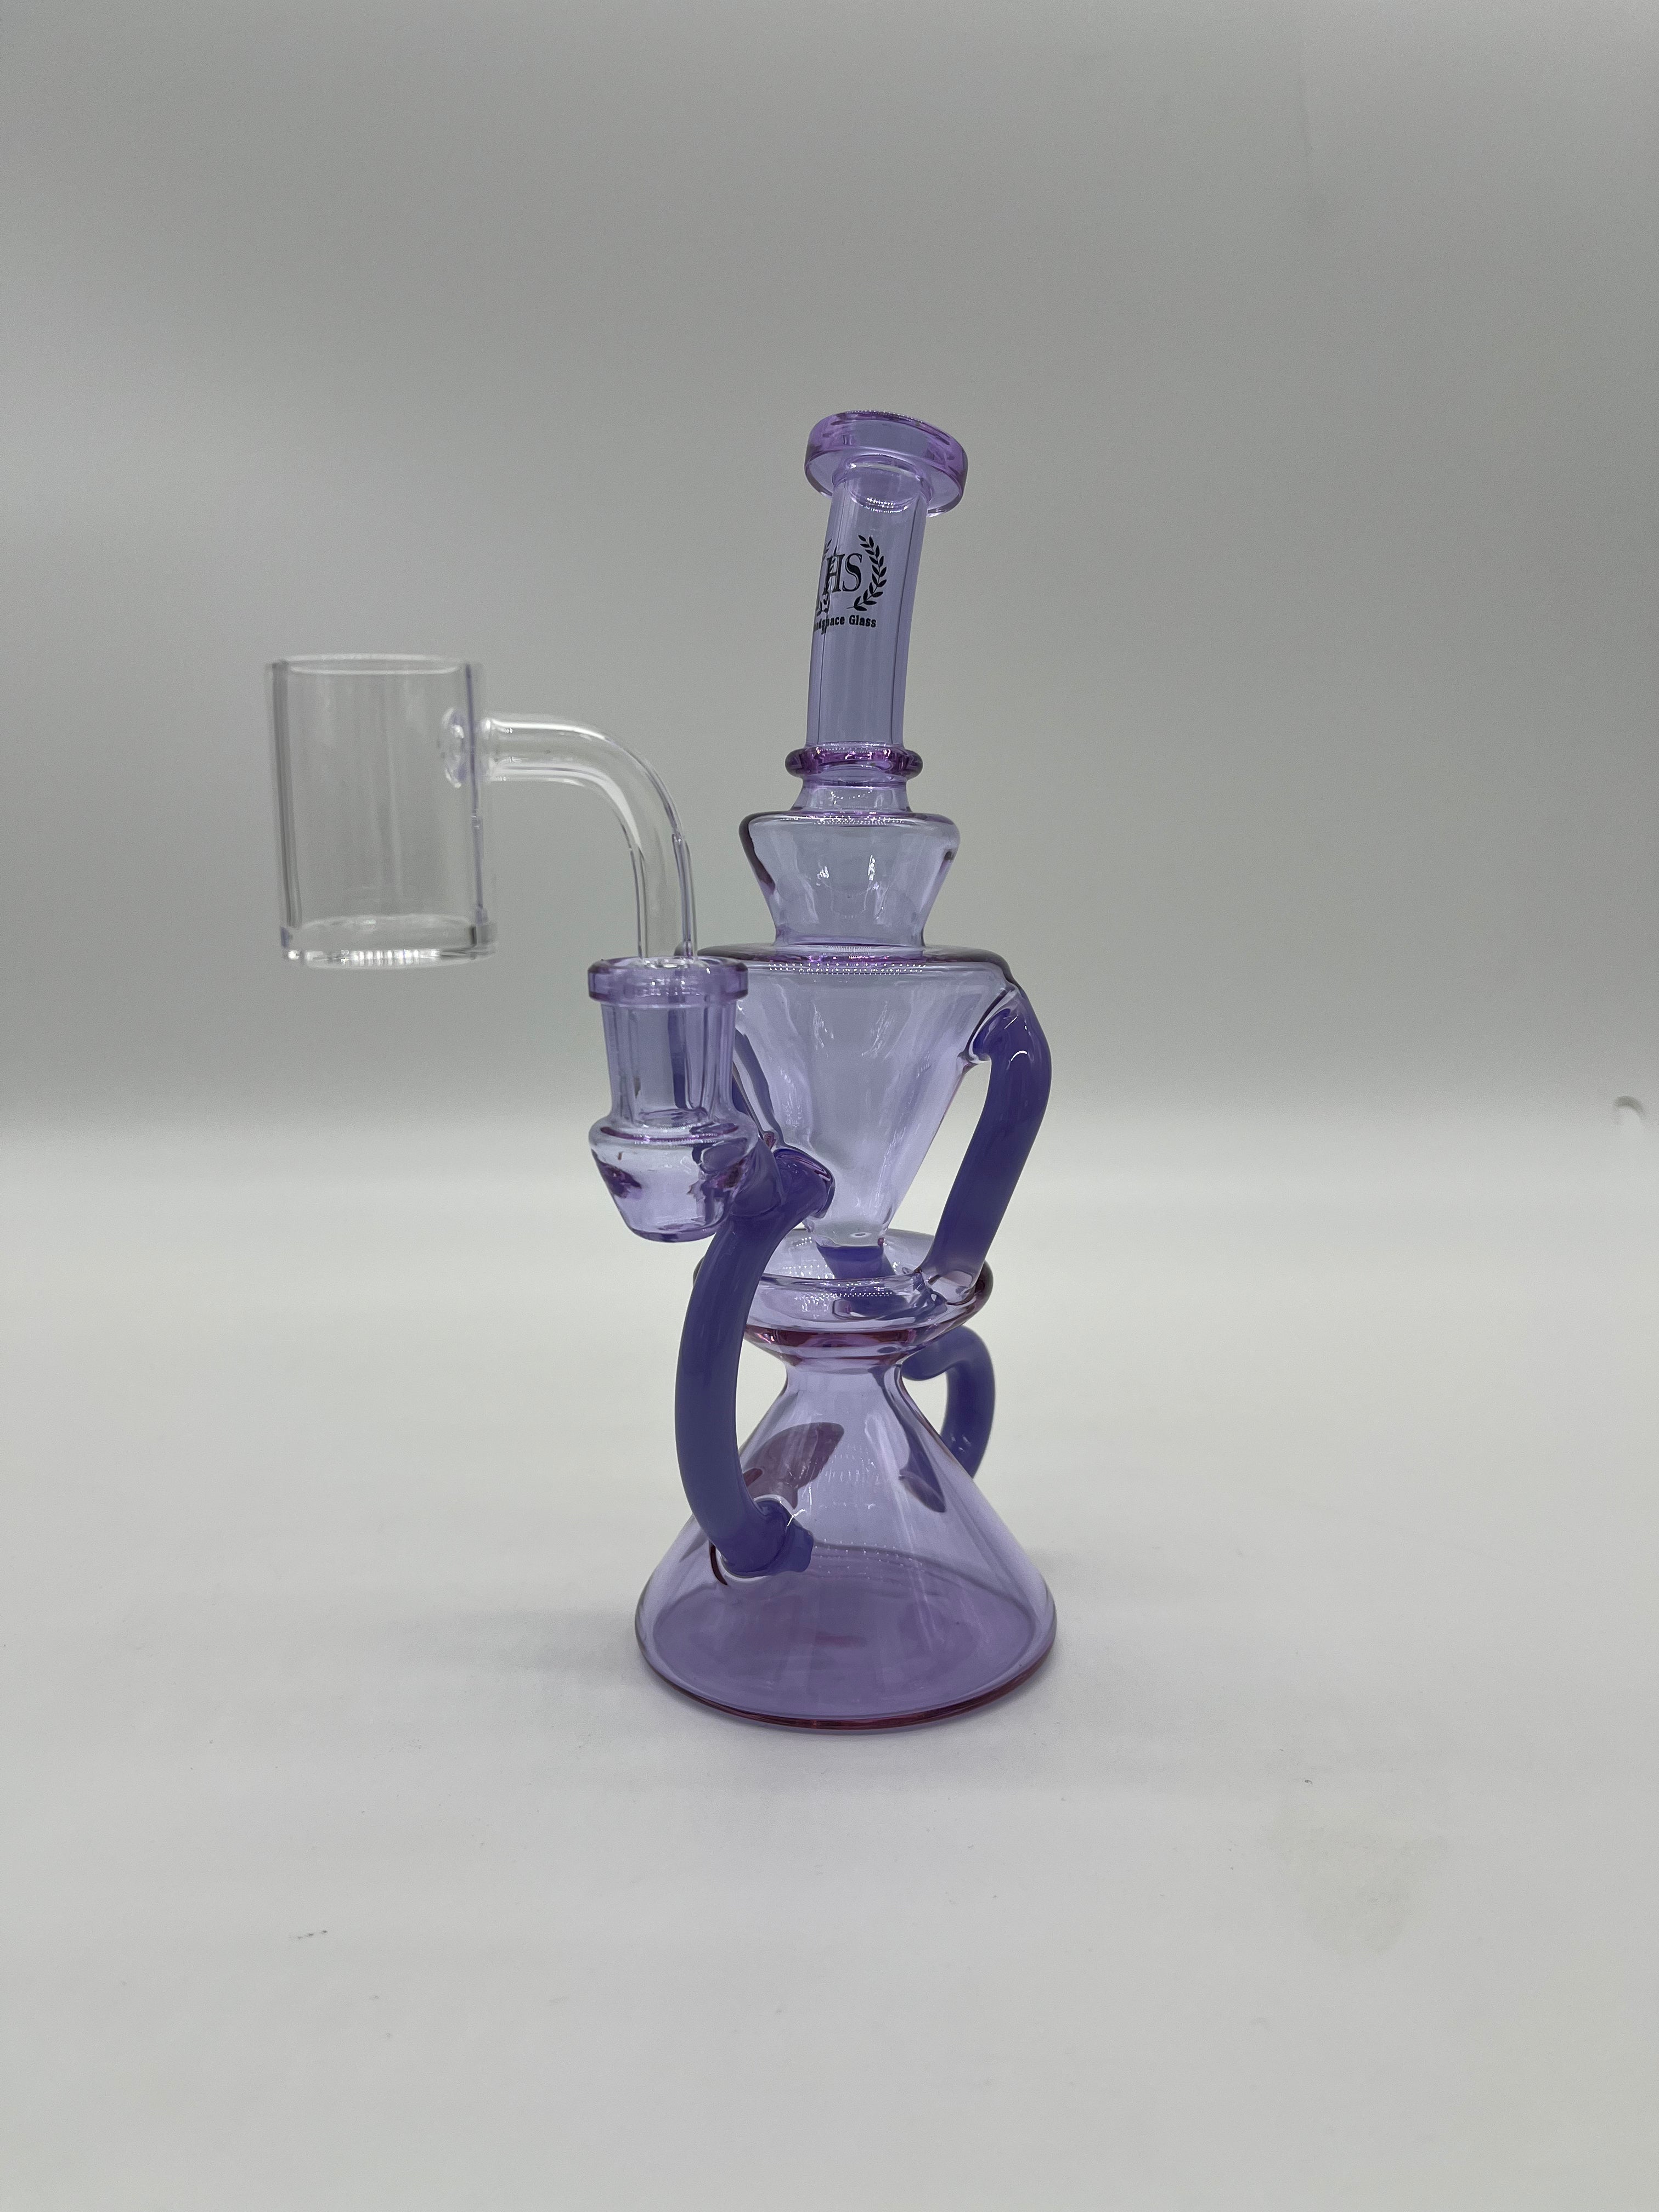 HS recycler